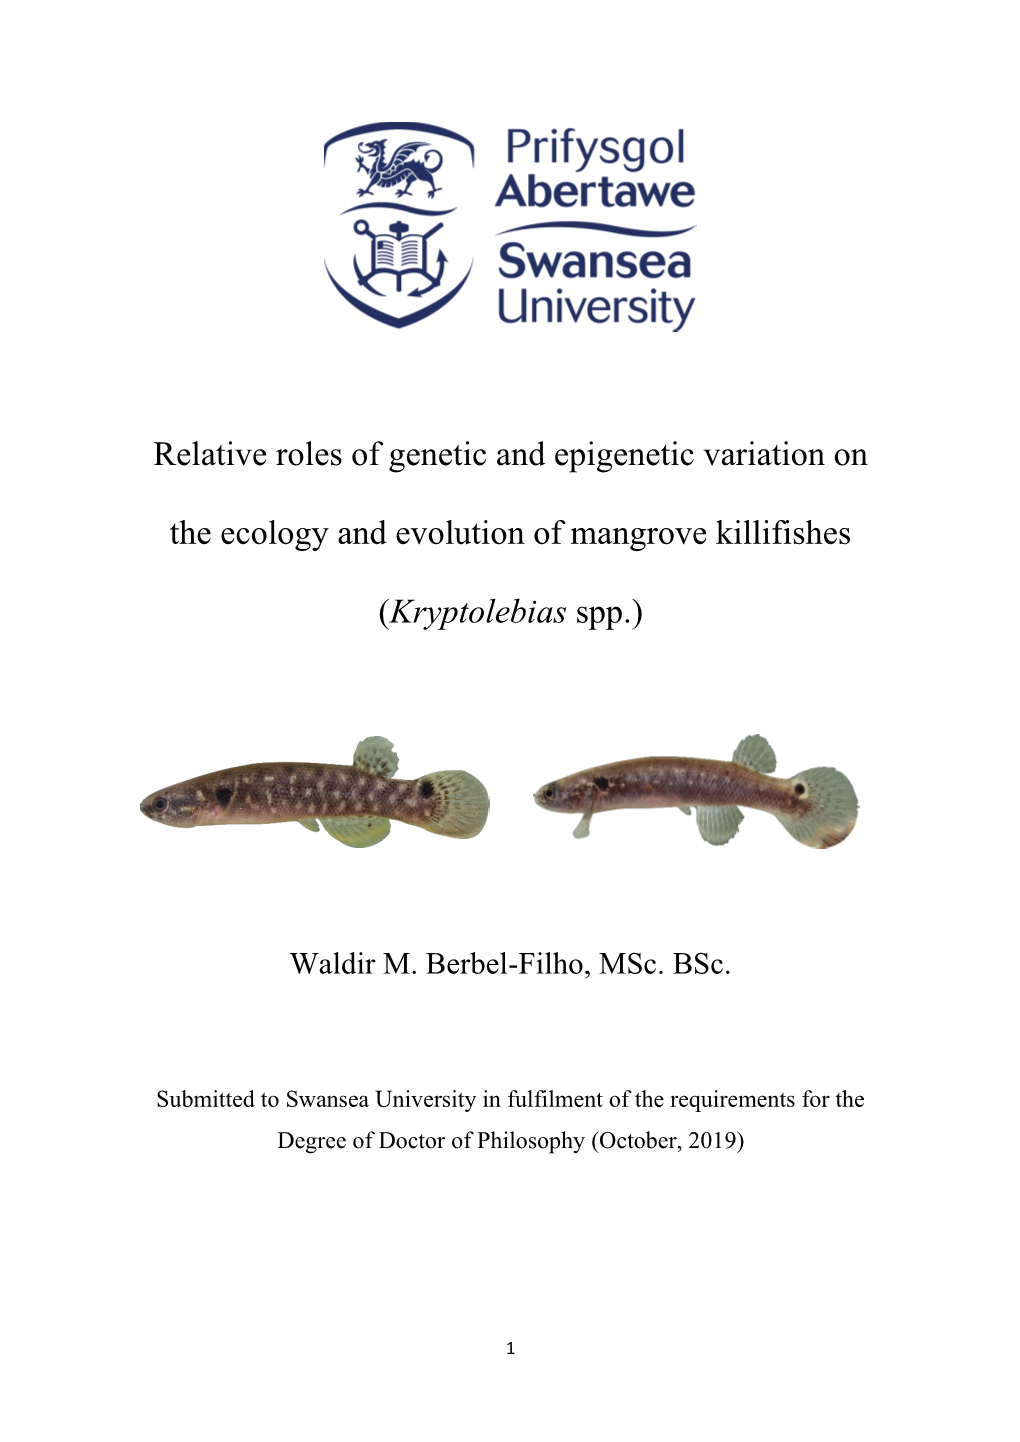 Relative Roles of Genetic and Epigenetic Variation on the Ecology and Evolution of Mangrove Killifishes